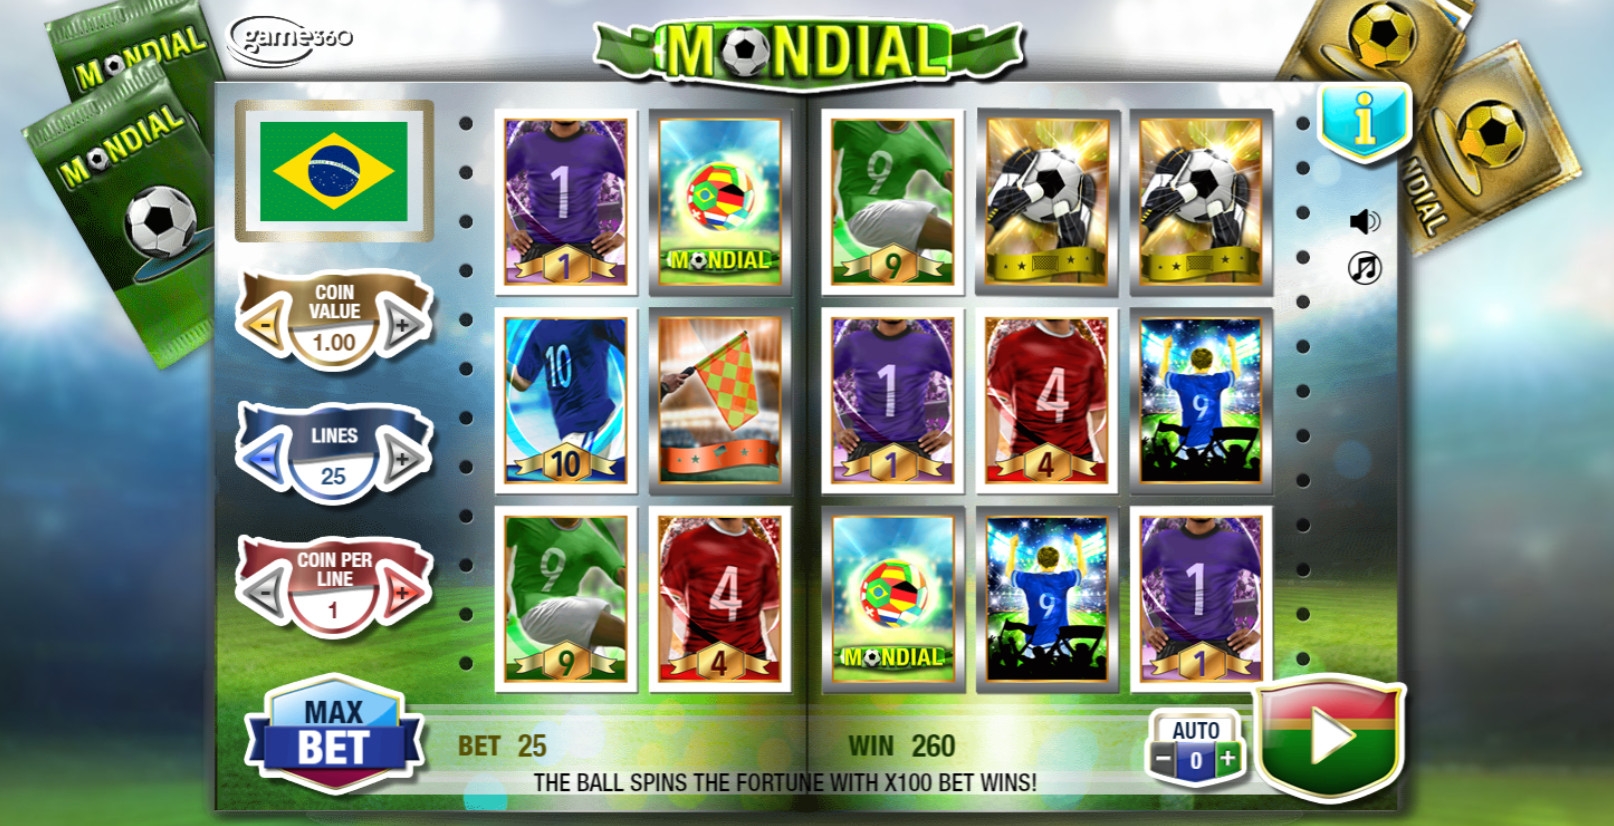 Mondial (Mondial) from category Slots